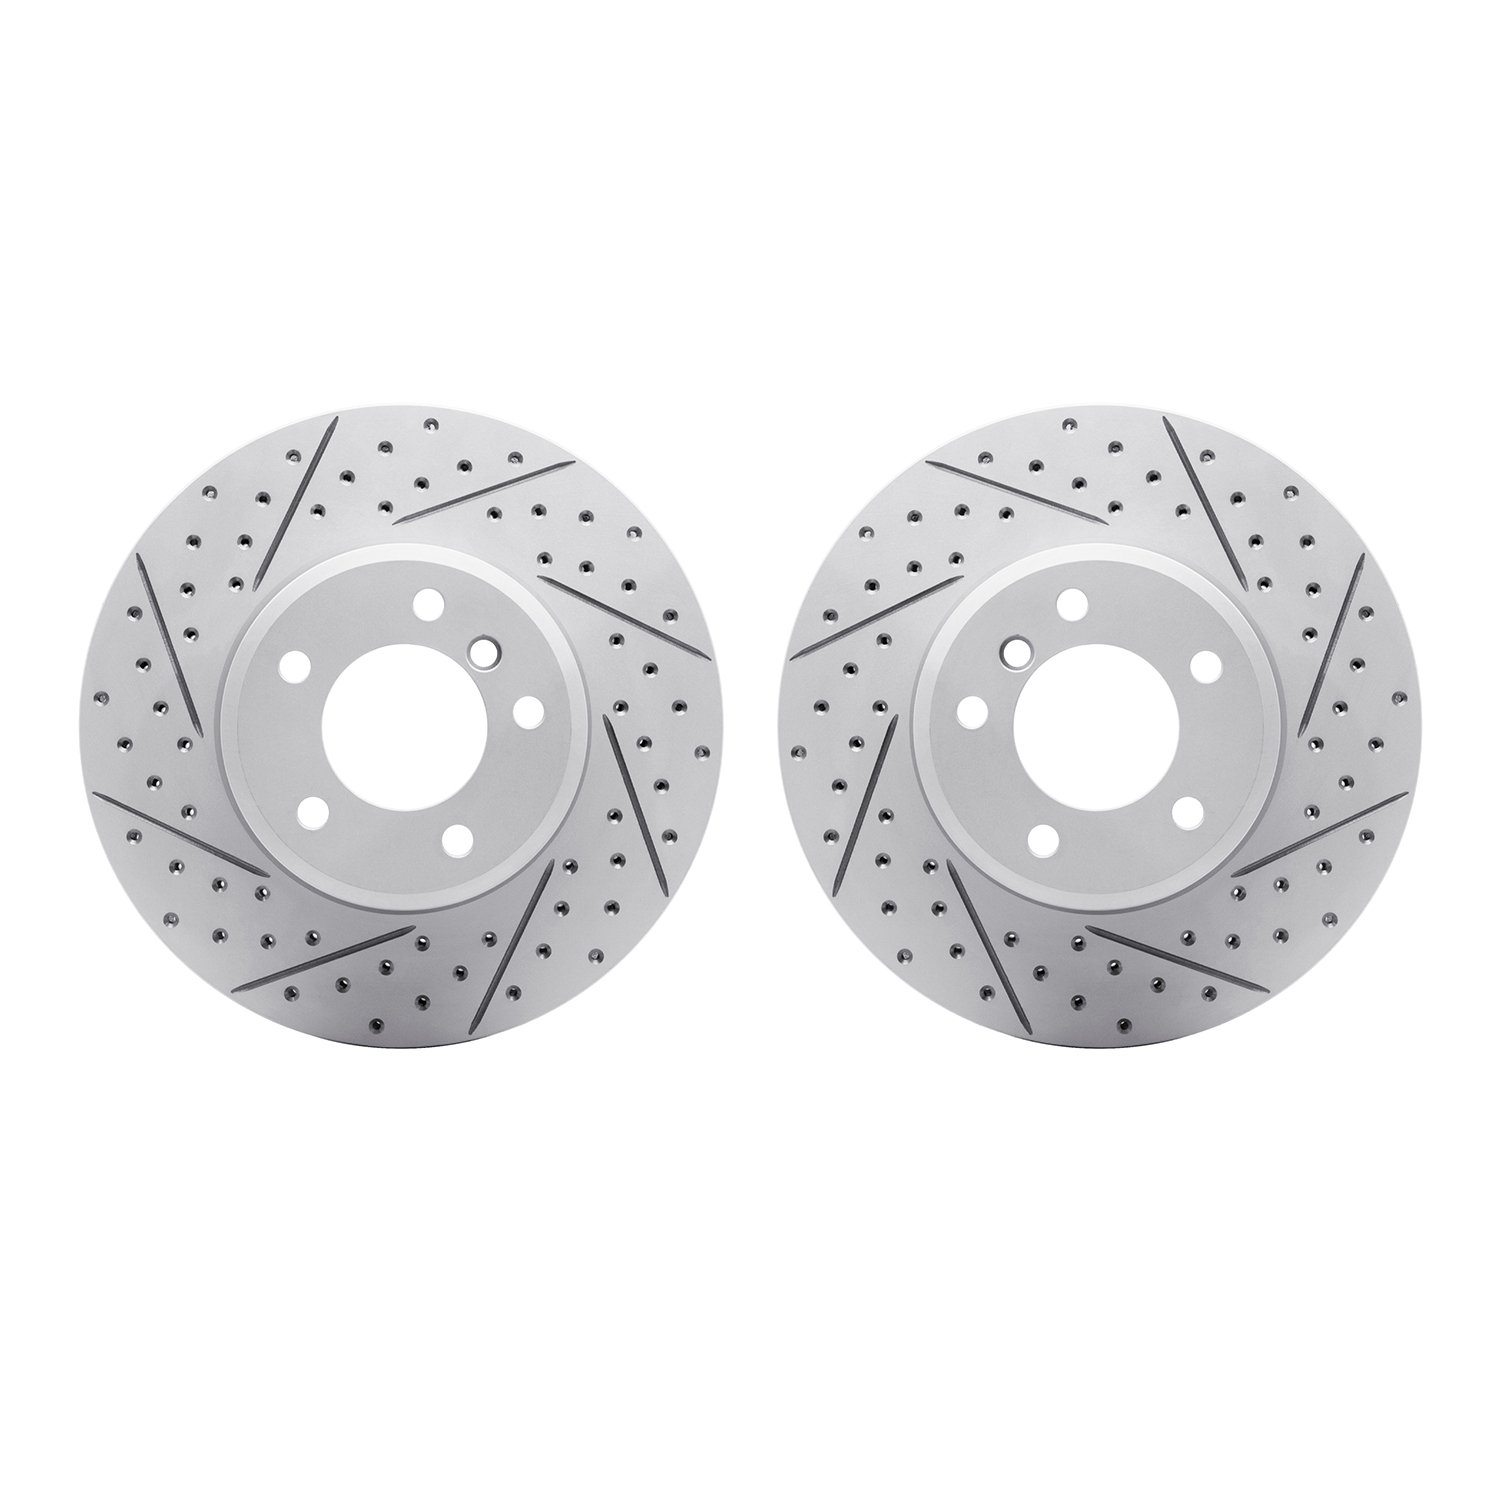 2002-31019 Geoperformance Drilled/Slotted Brake Rotors, 2004-2010 BMW, Position: Front